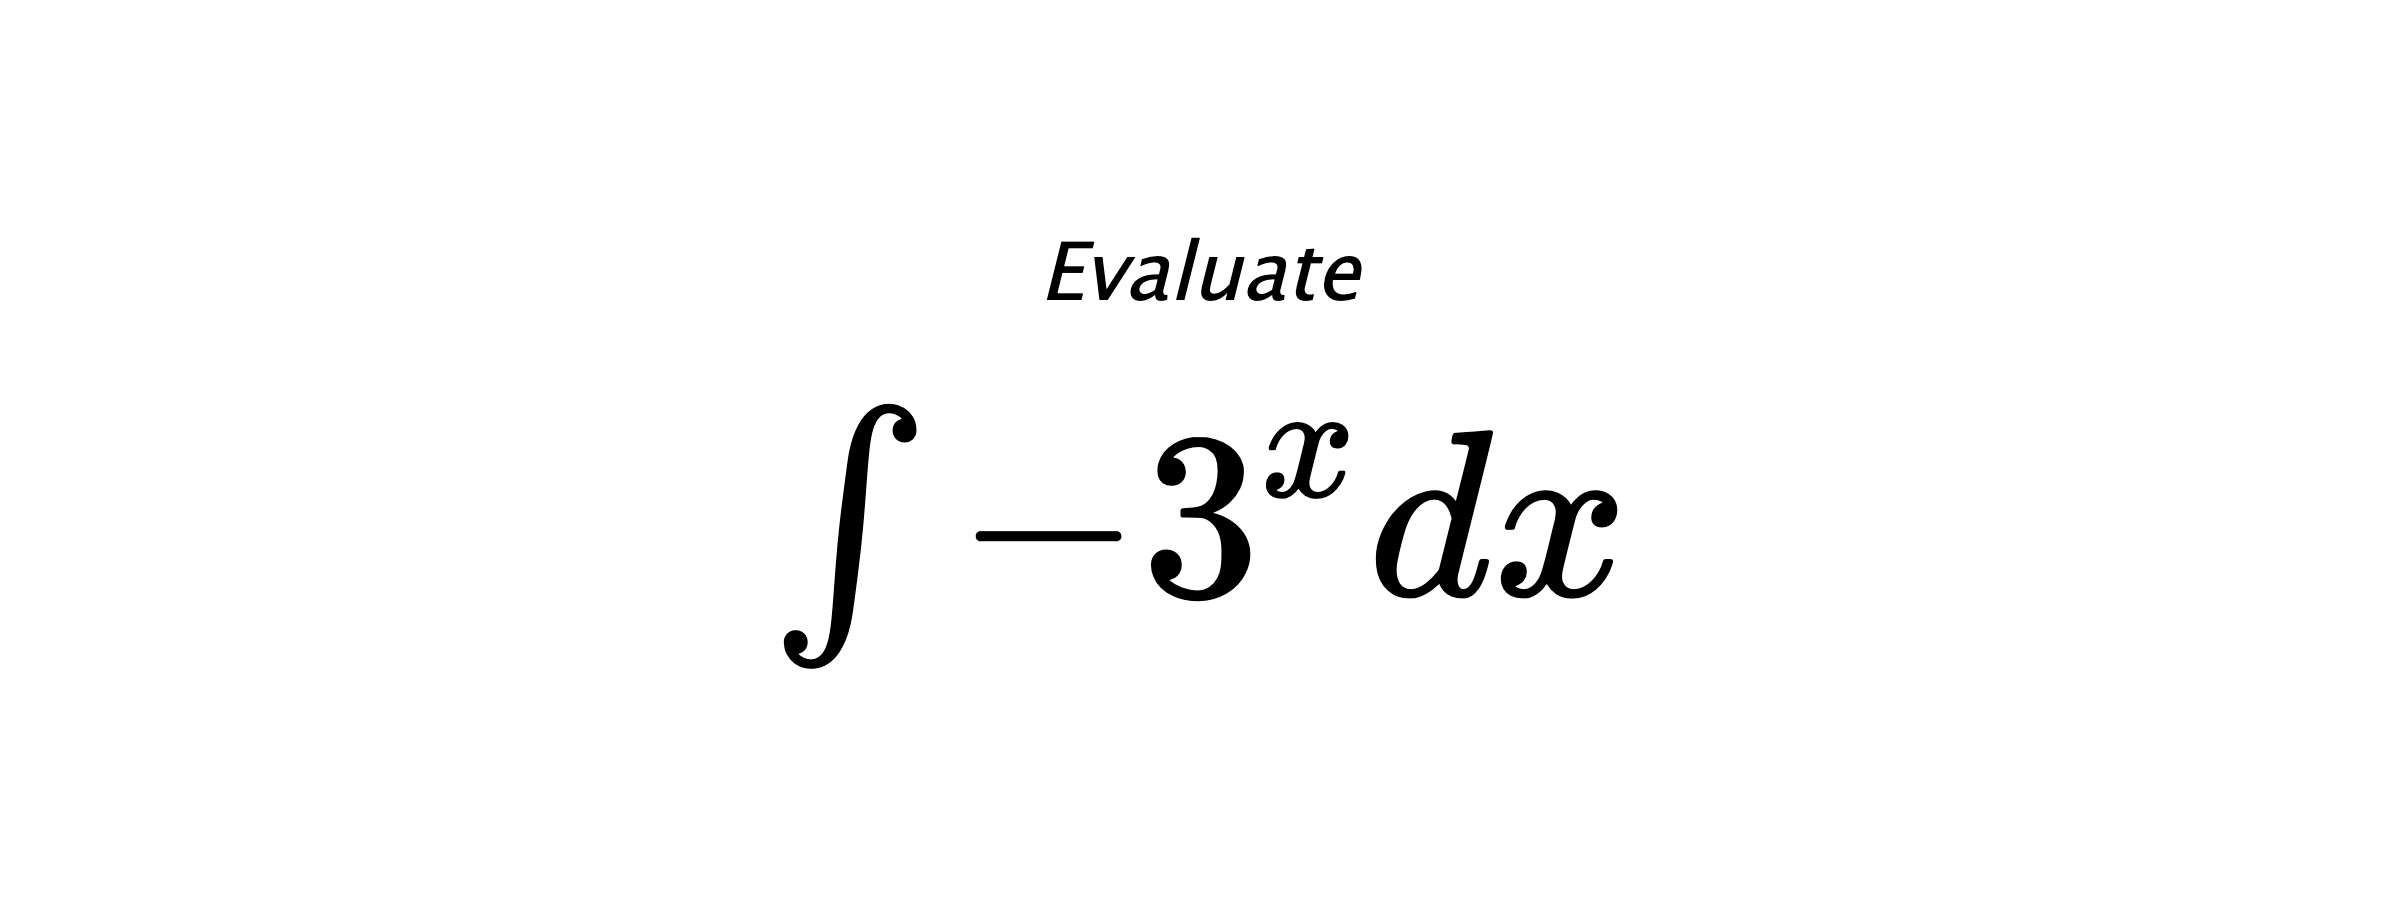 Evaluate $ \int -3^xdx $